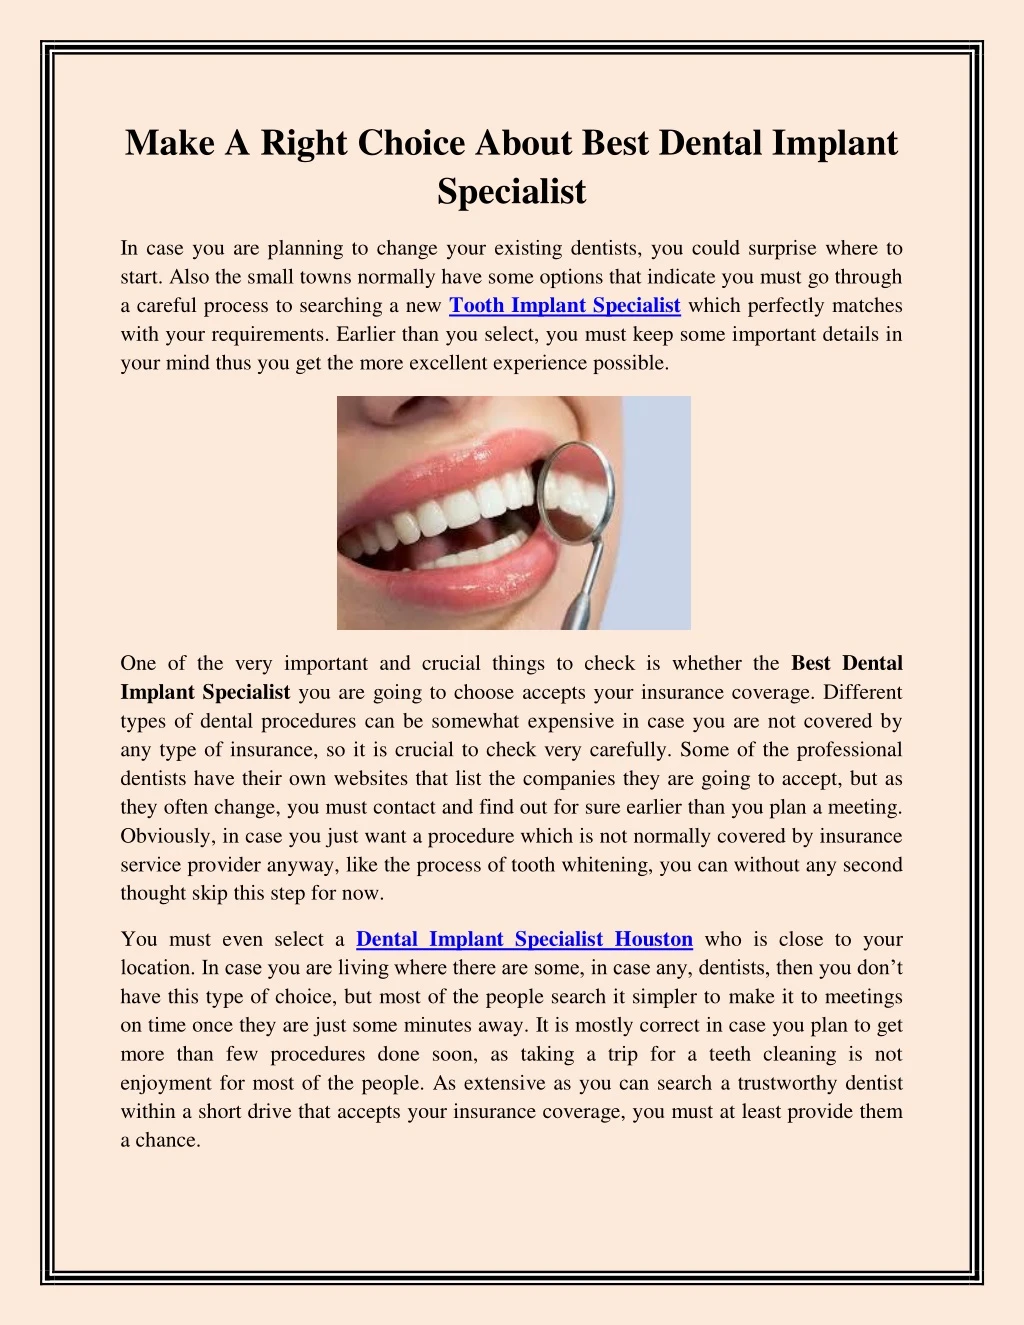 make a right choice about best dental implant